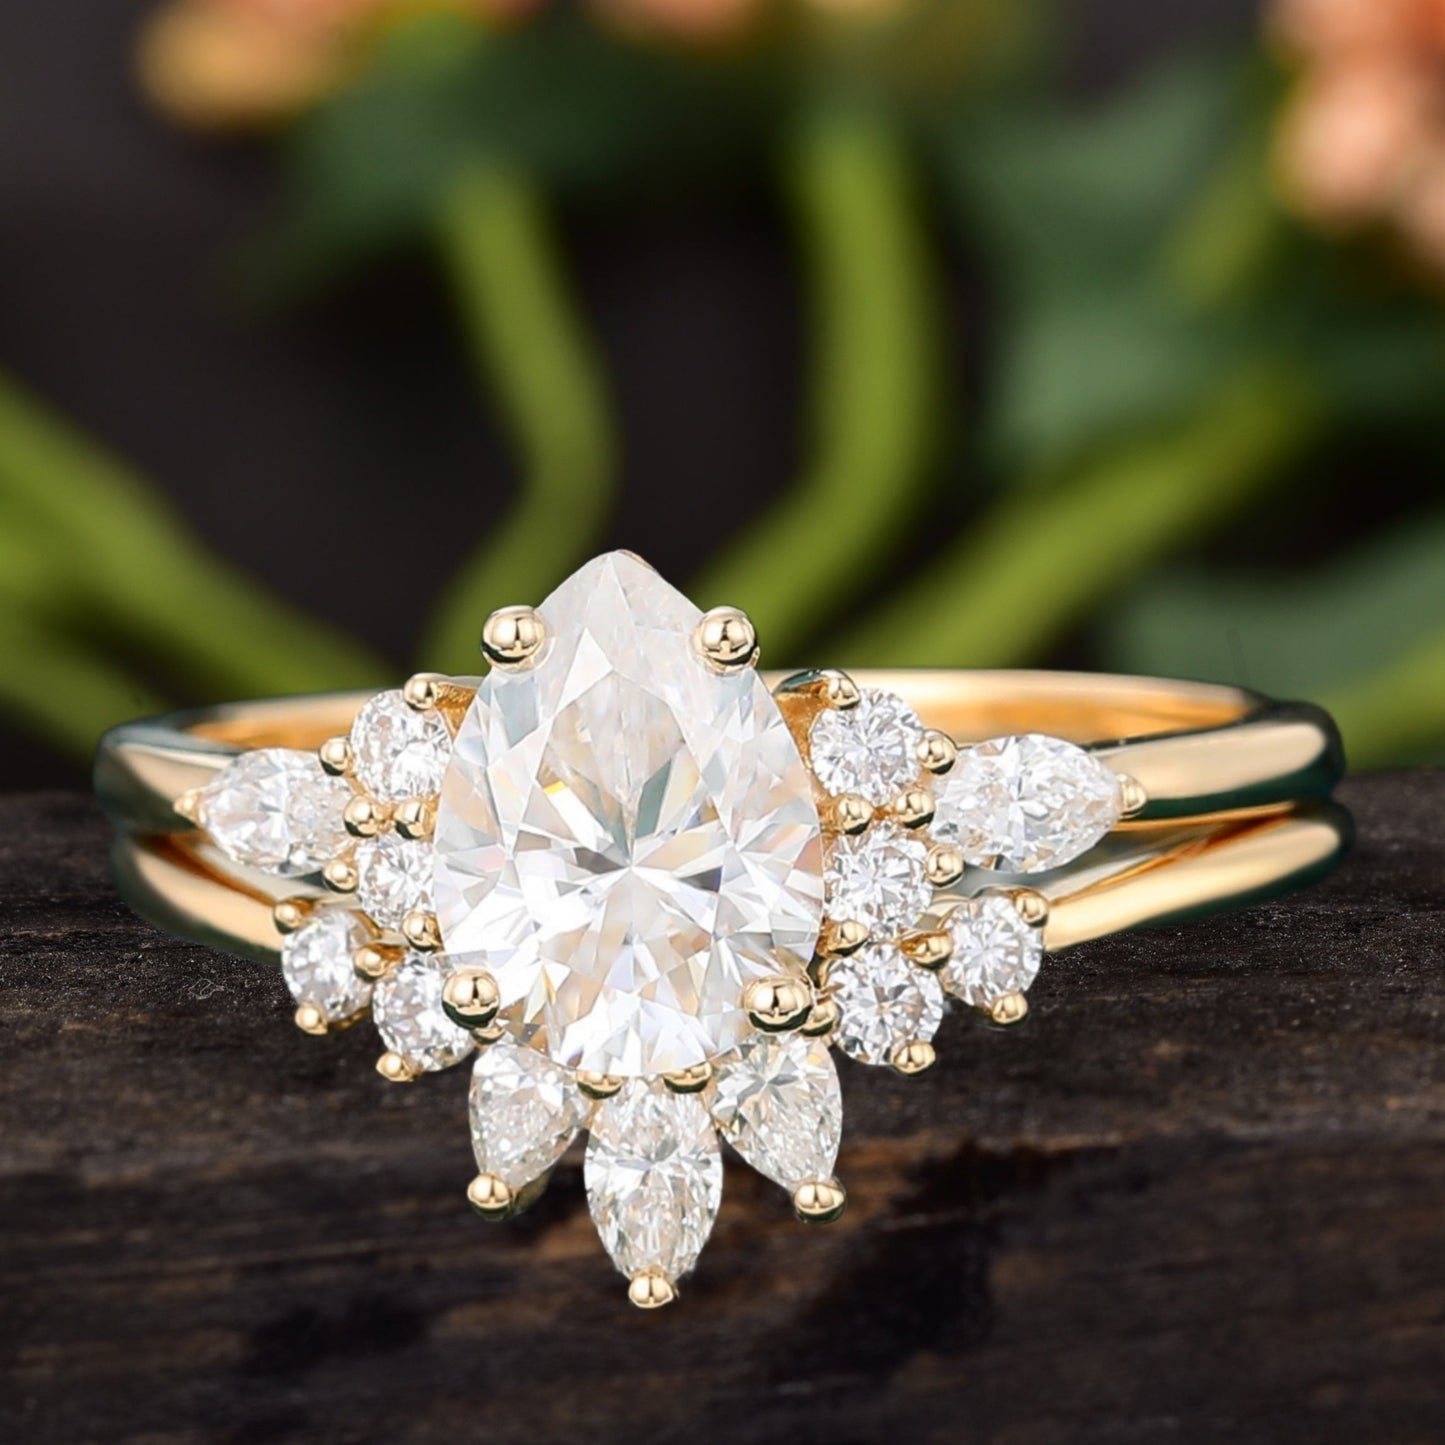 Pear shaped Moissanite engagement ring set with curved band